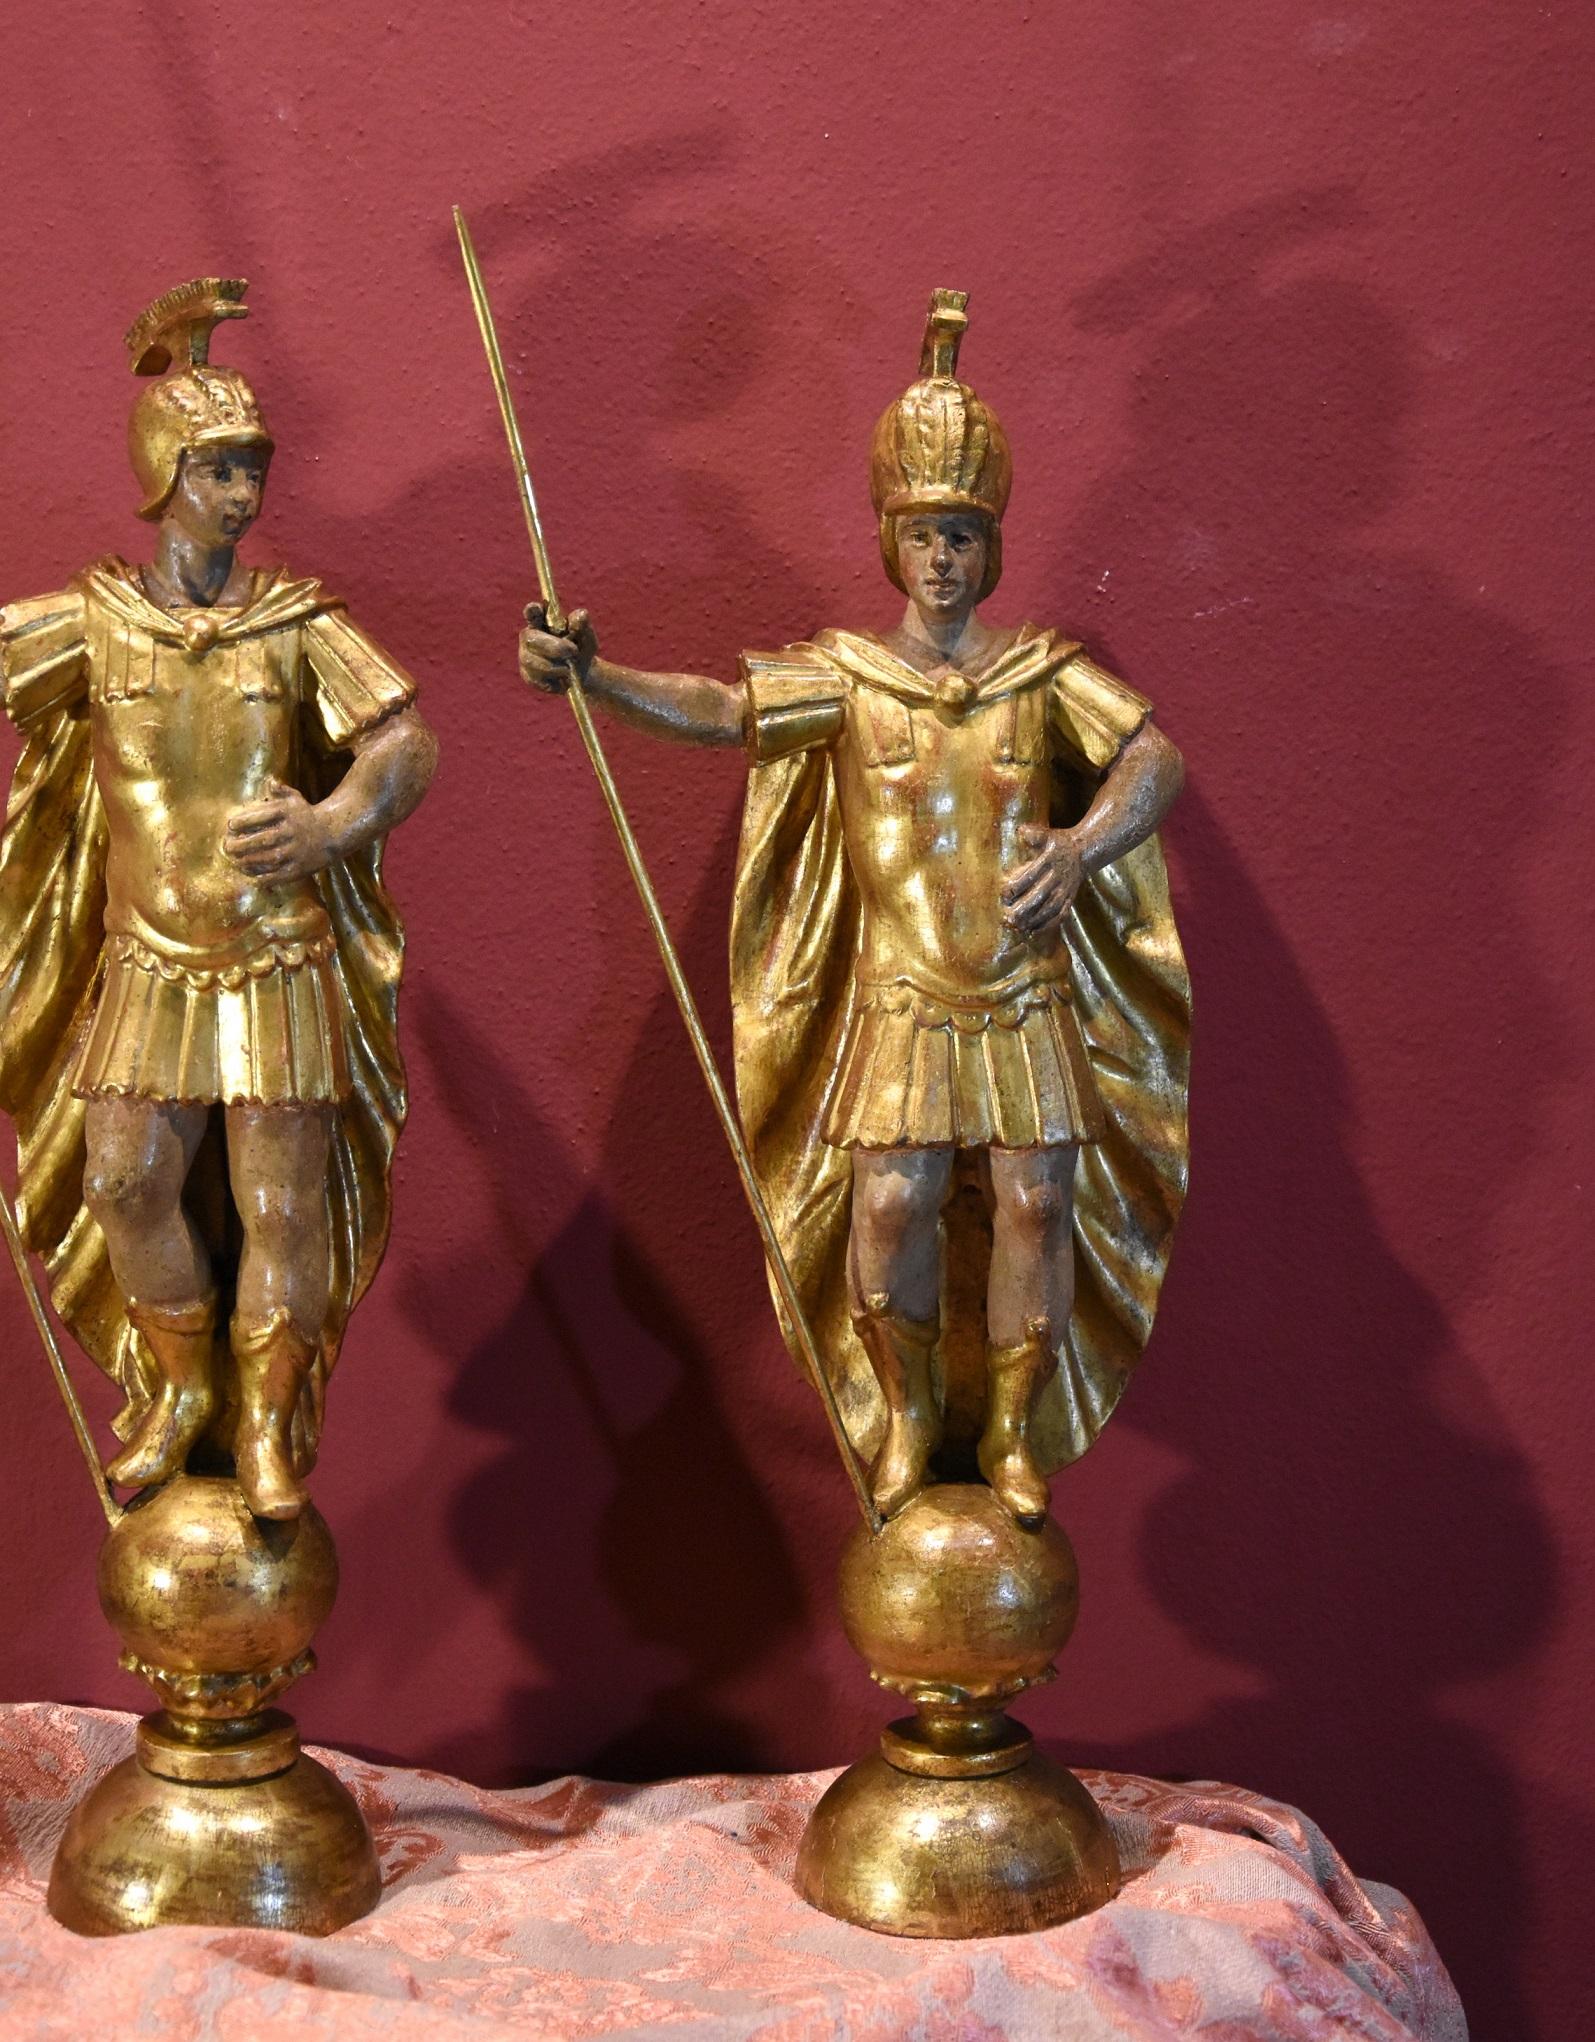 Wooden sculptures depicting a pair of full-length Roman soldiers
Rome, 18th century
Carved and gilded wood (walnut?)

Dimensions: Maximum height (at lance) 62 cm./ Maximum width: 28 cm.

Pair of wooden sculptures depicting two Roman centurions,